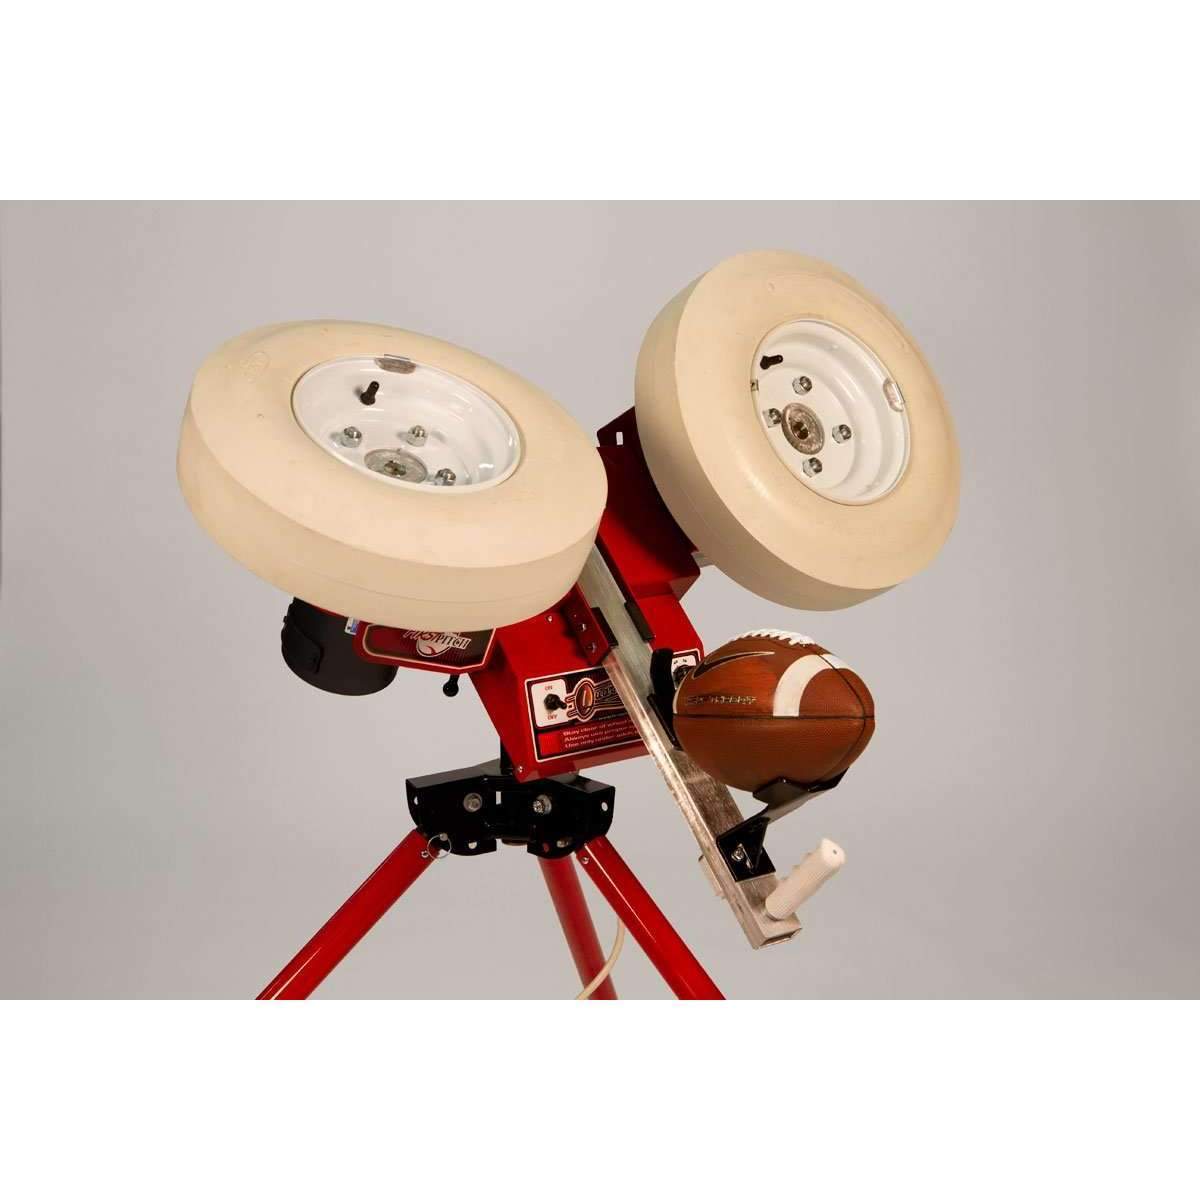 First Pitch Quarterback Football Throwing Machine Back Left Side View